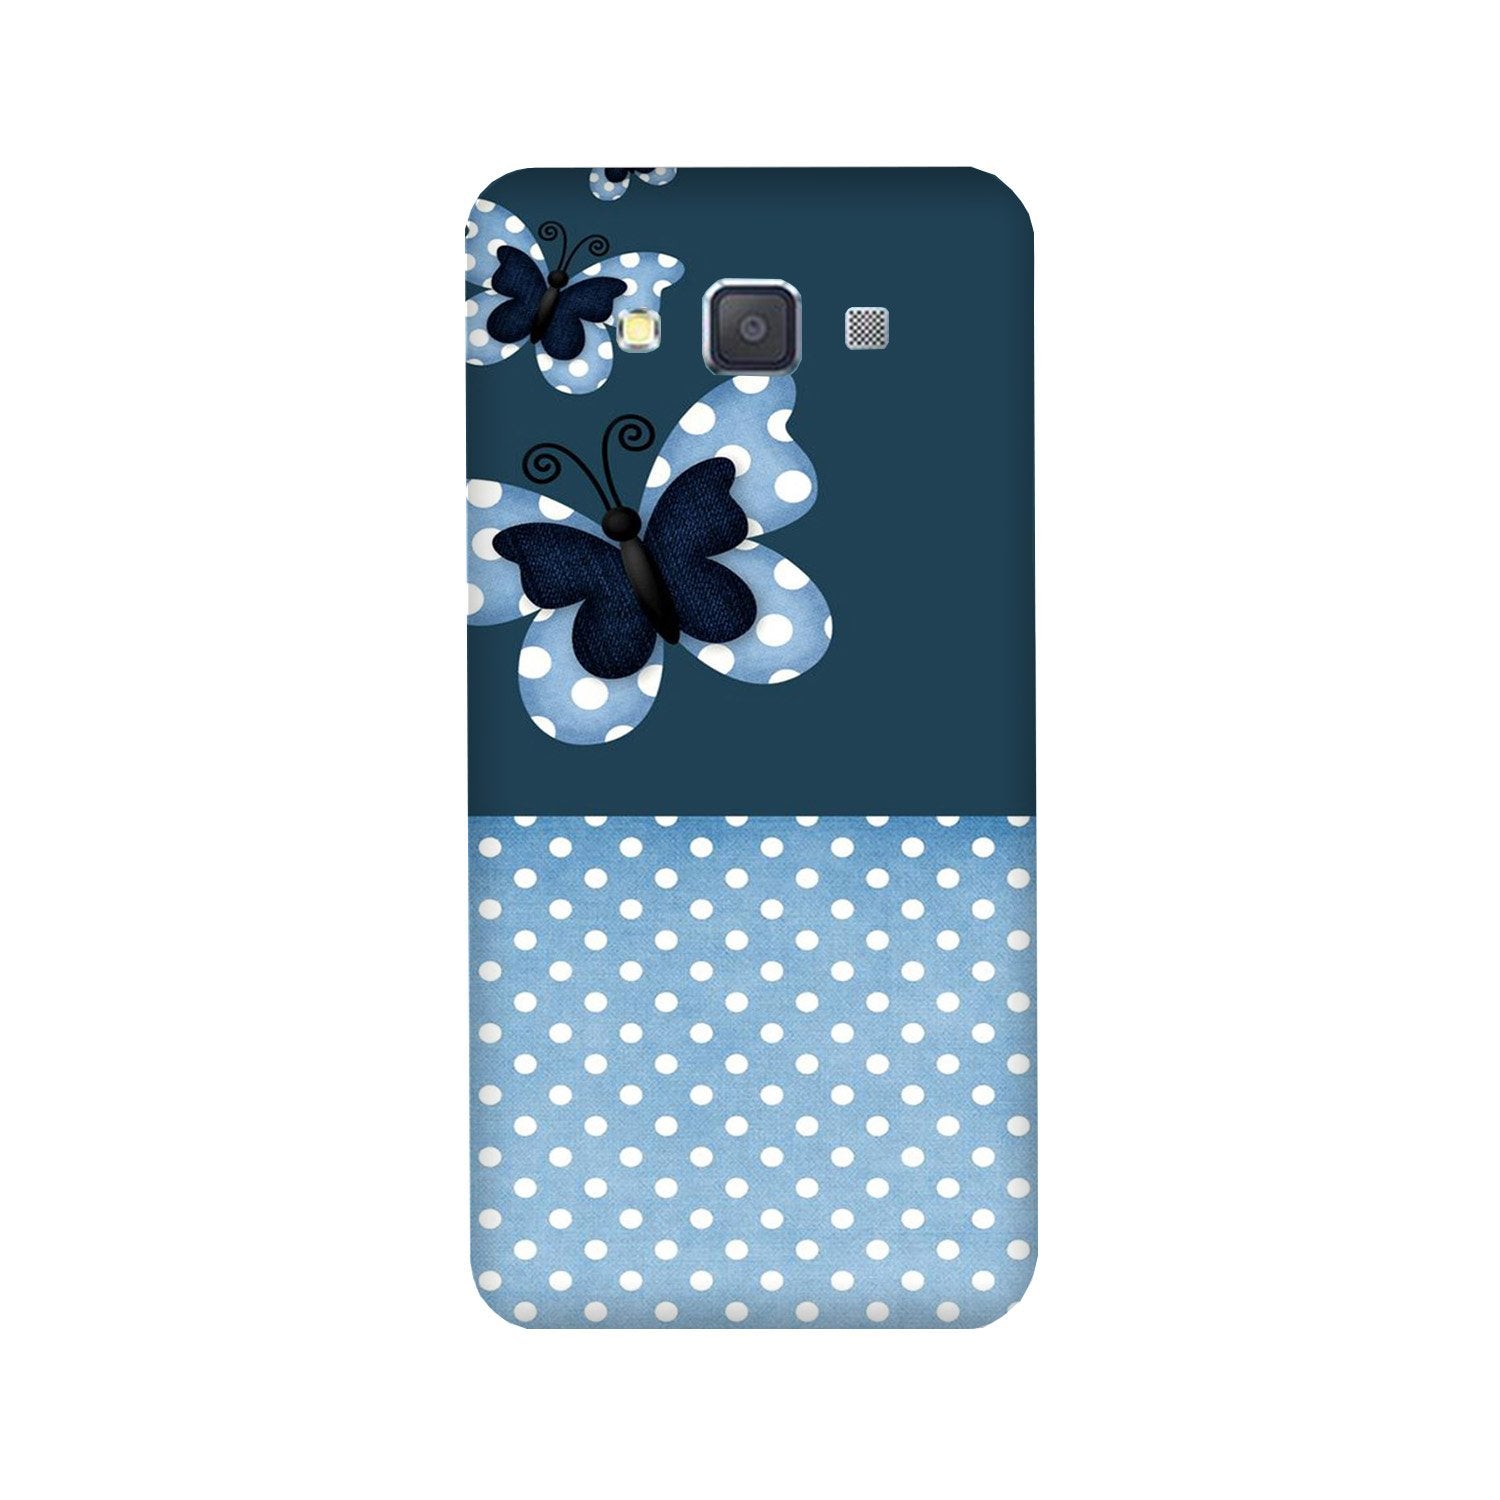 White dots Butterfly Case for Galaxy ON7/ON7 Pro